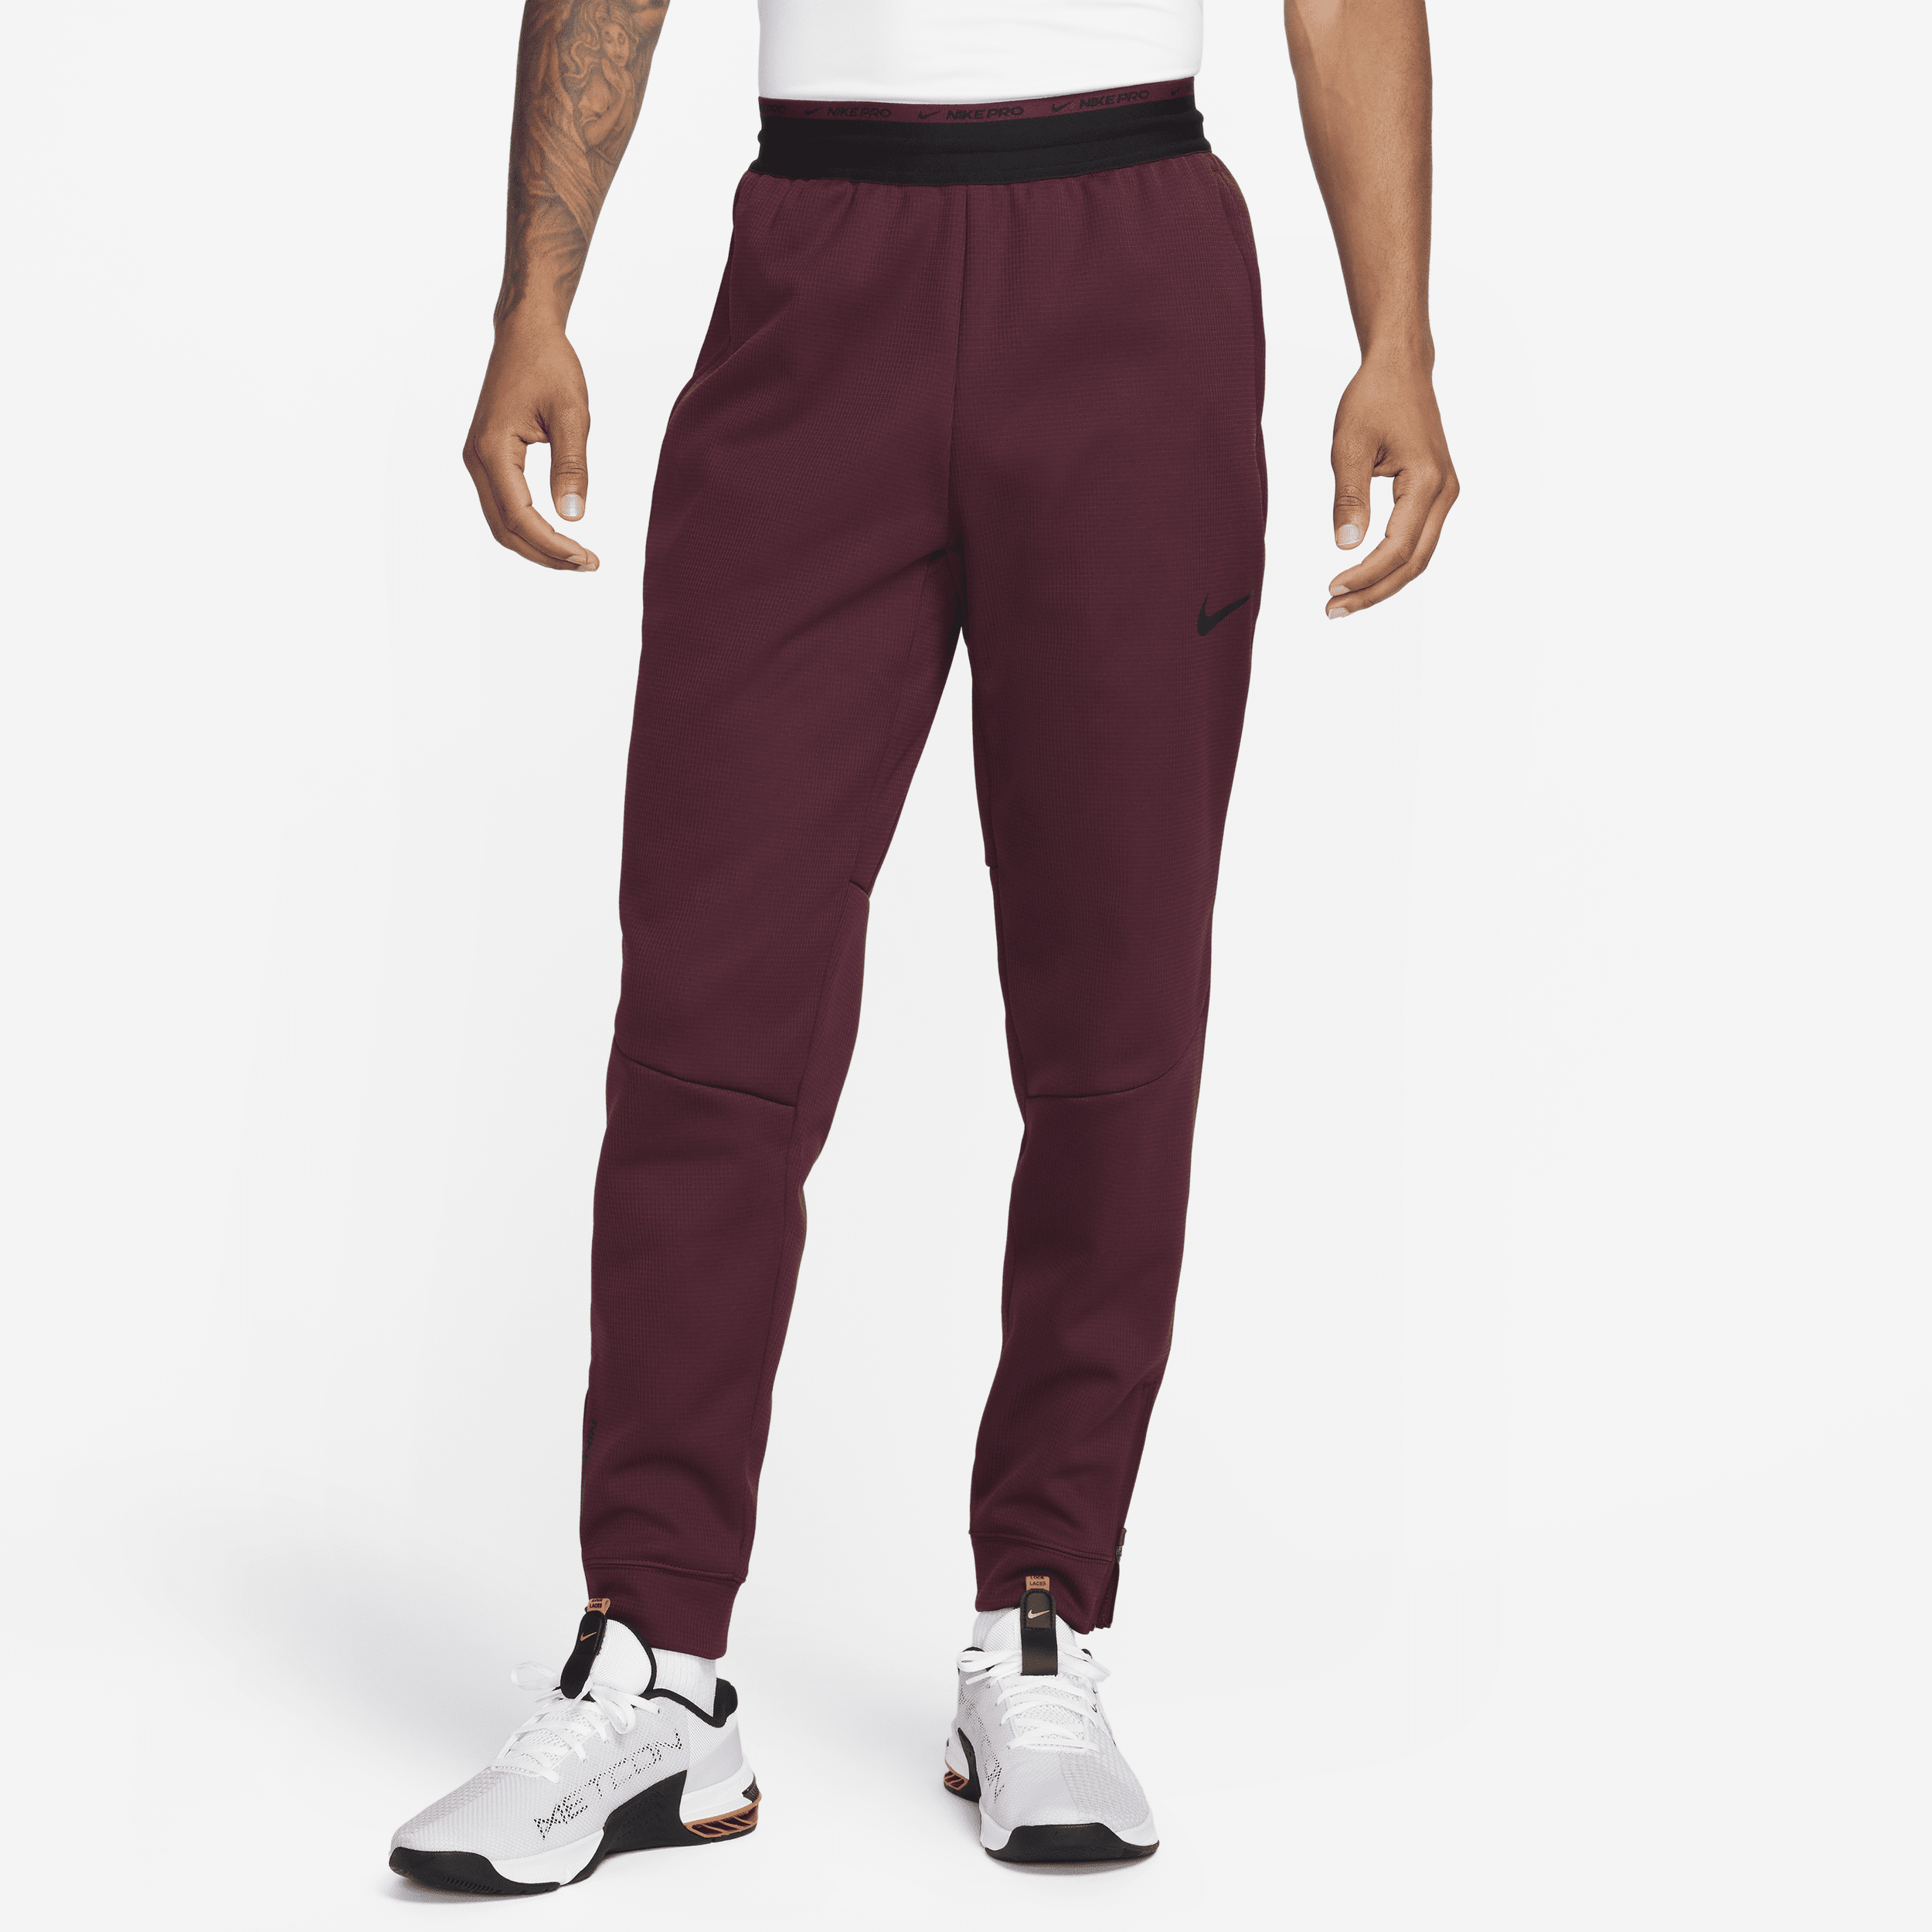 Pantaloni fitness Therma-FIT Nike Therma Sphere – Uomo - Rosso